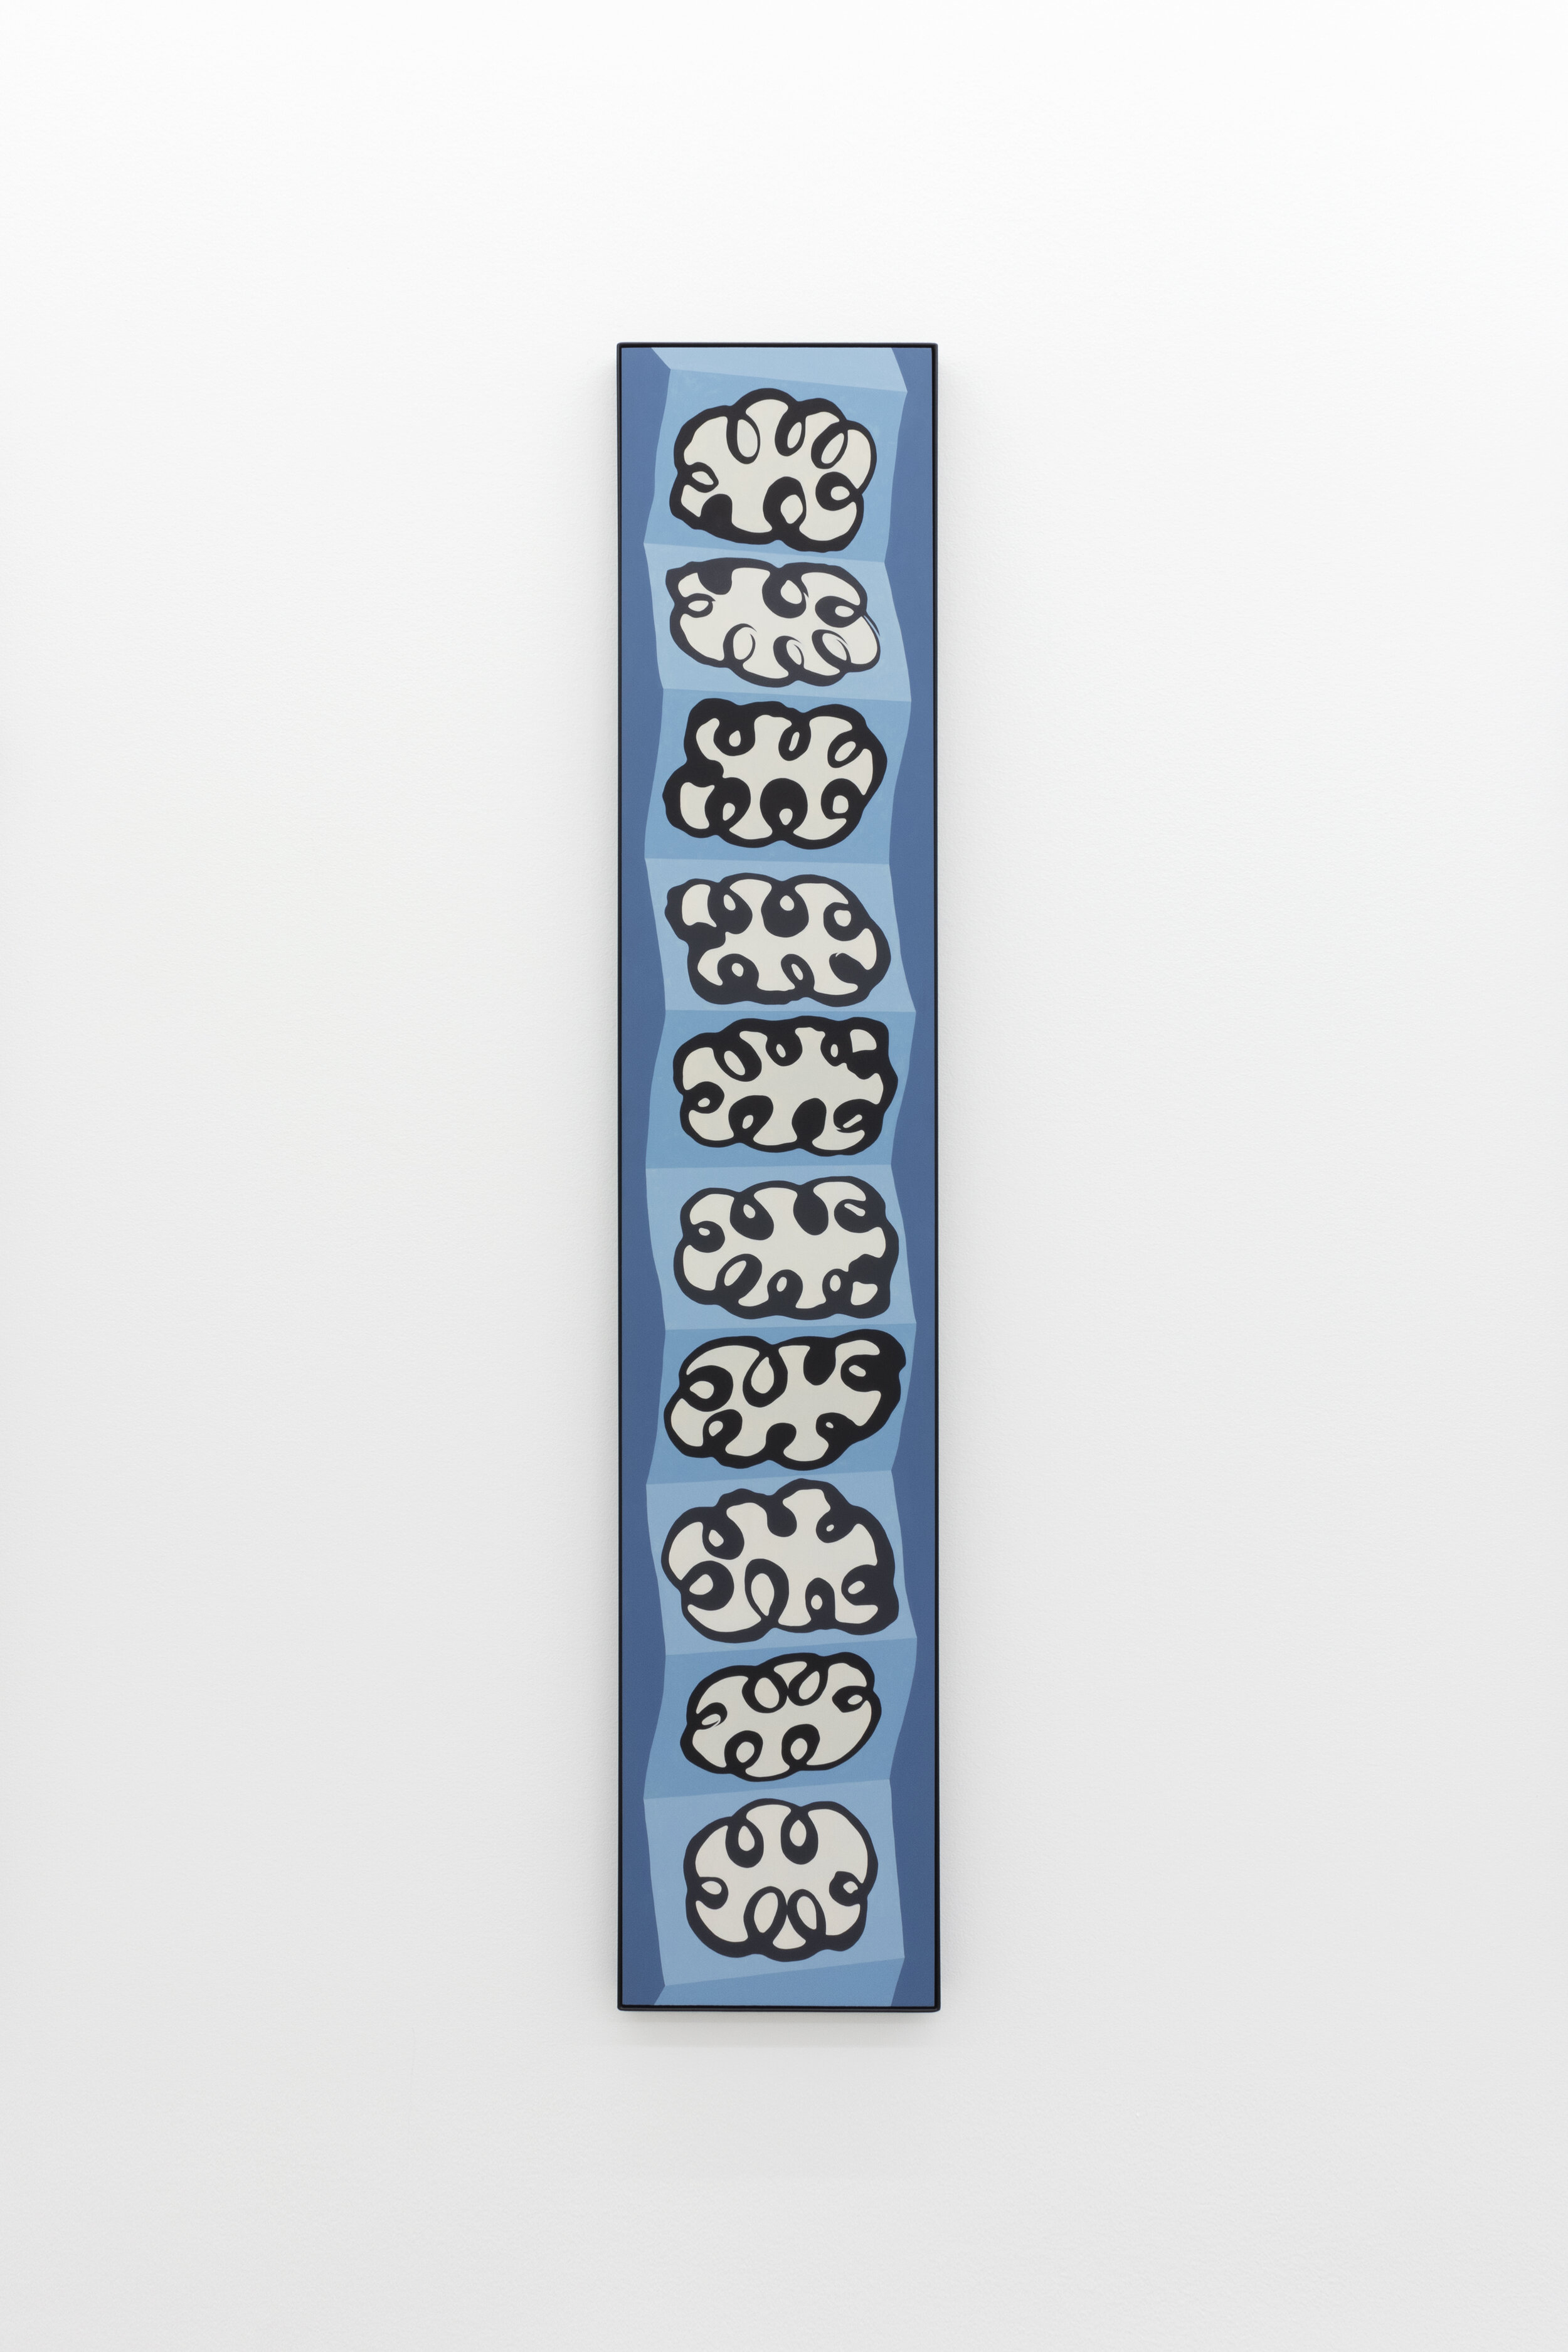  Vanessa Maltese    Hypothesizing coincidence no. 7,  2020   Oil on panel, powder coated steel, wood, magnets   60.25 x 11.25 in  